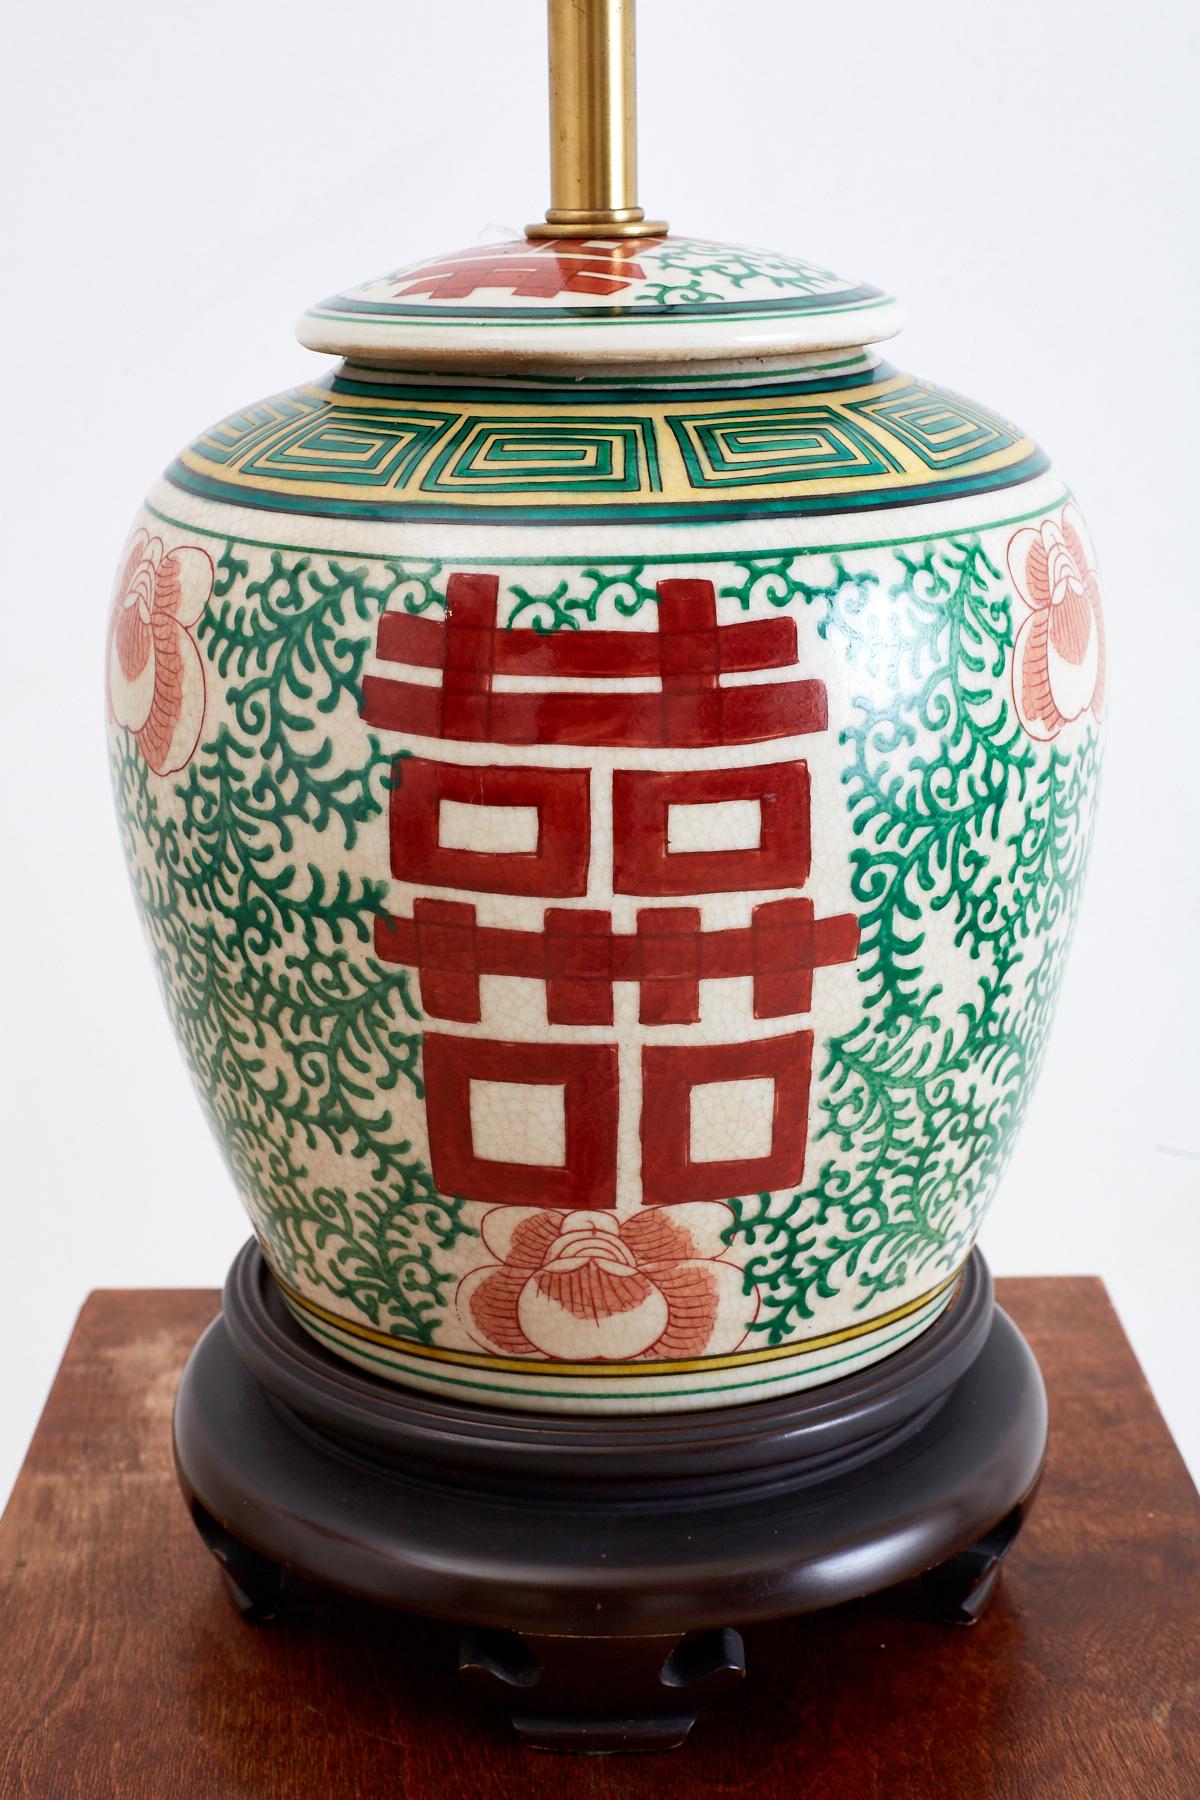 Cheerful Chinese porcelain ginger jar table lamp featuring a double happiness or wedded bliss symbol. The beautifully lidded jar is decorated with red Shuangxi symbols and green foliate designs over a light craquelure background. Topped with a dual